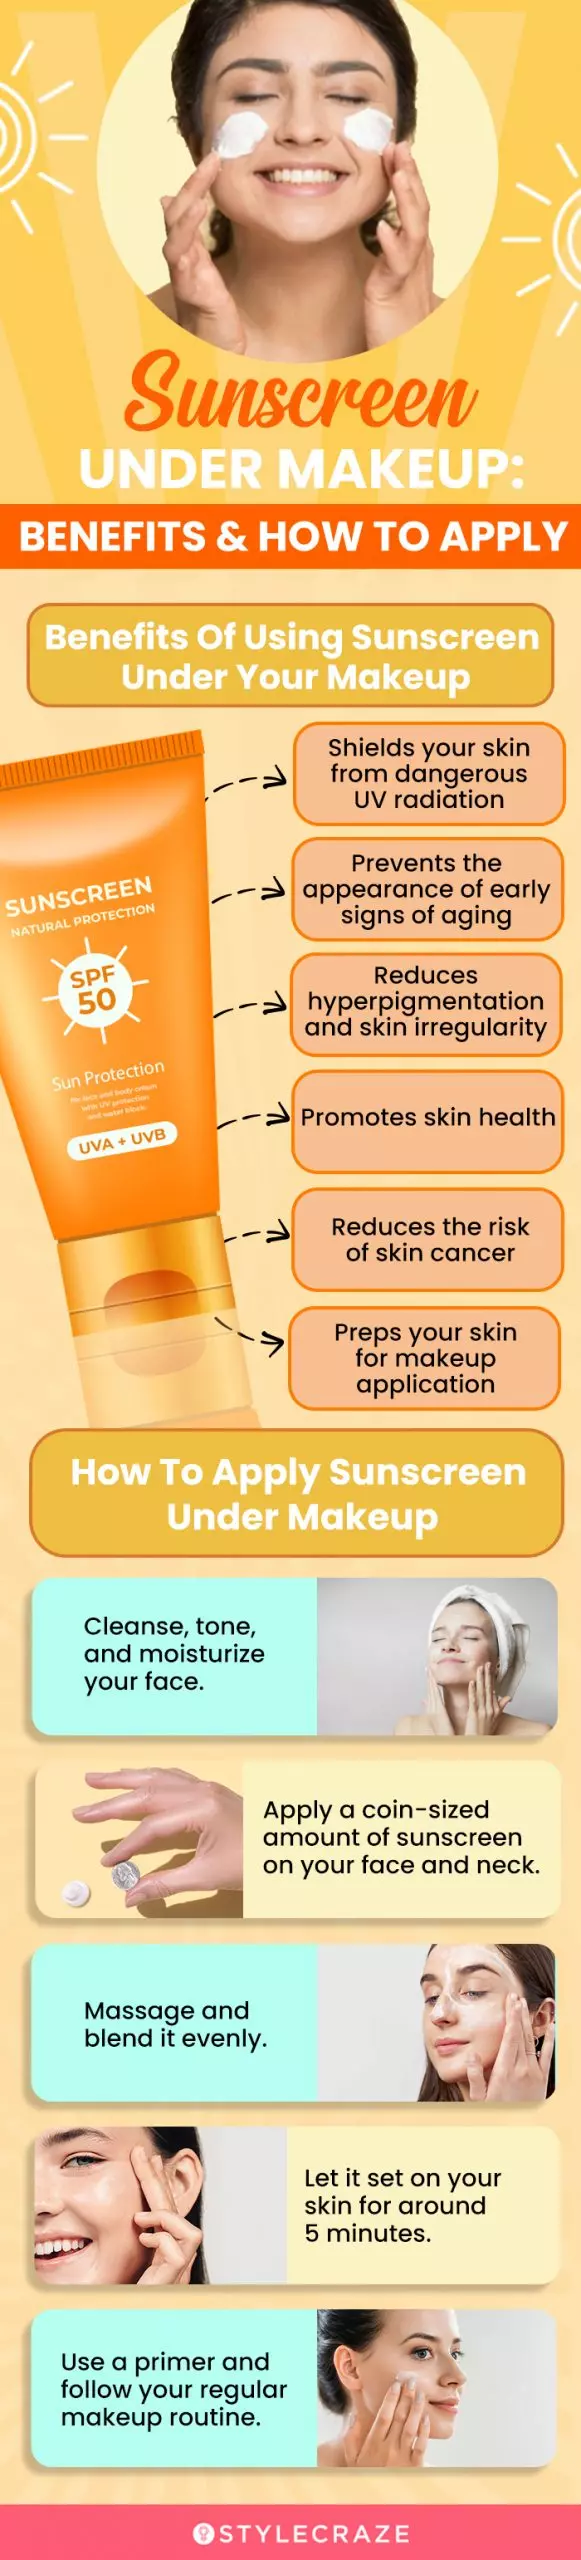 Sunscreen Under Makeup: Benefits And How To Apply (infographic)